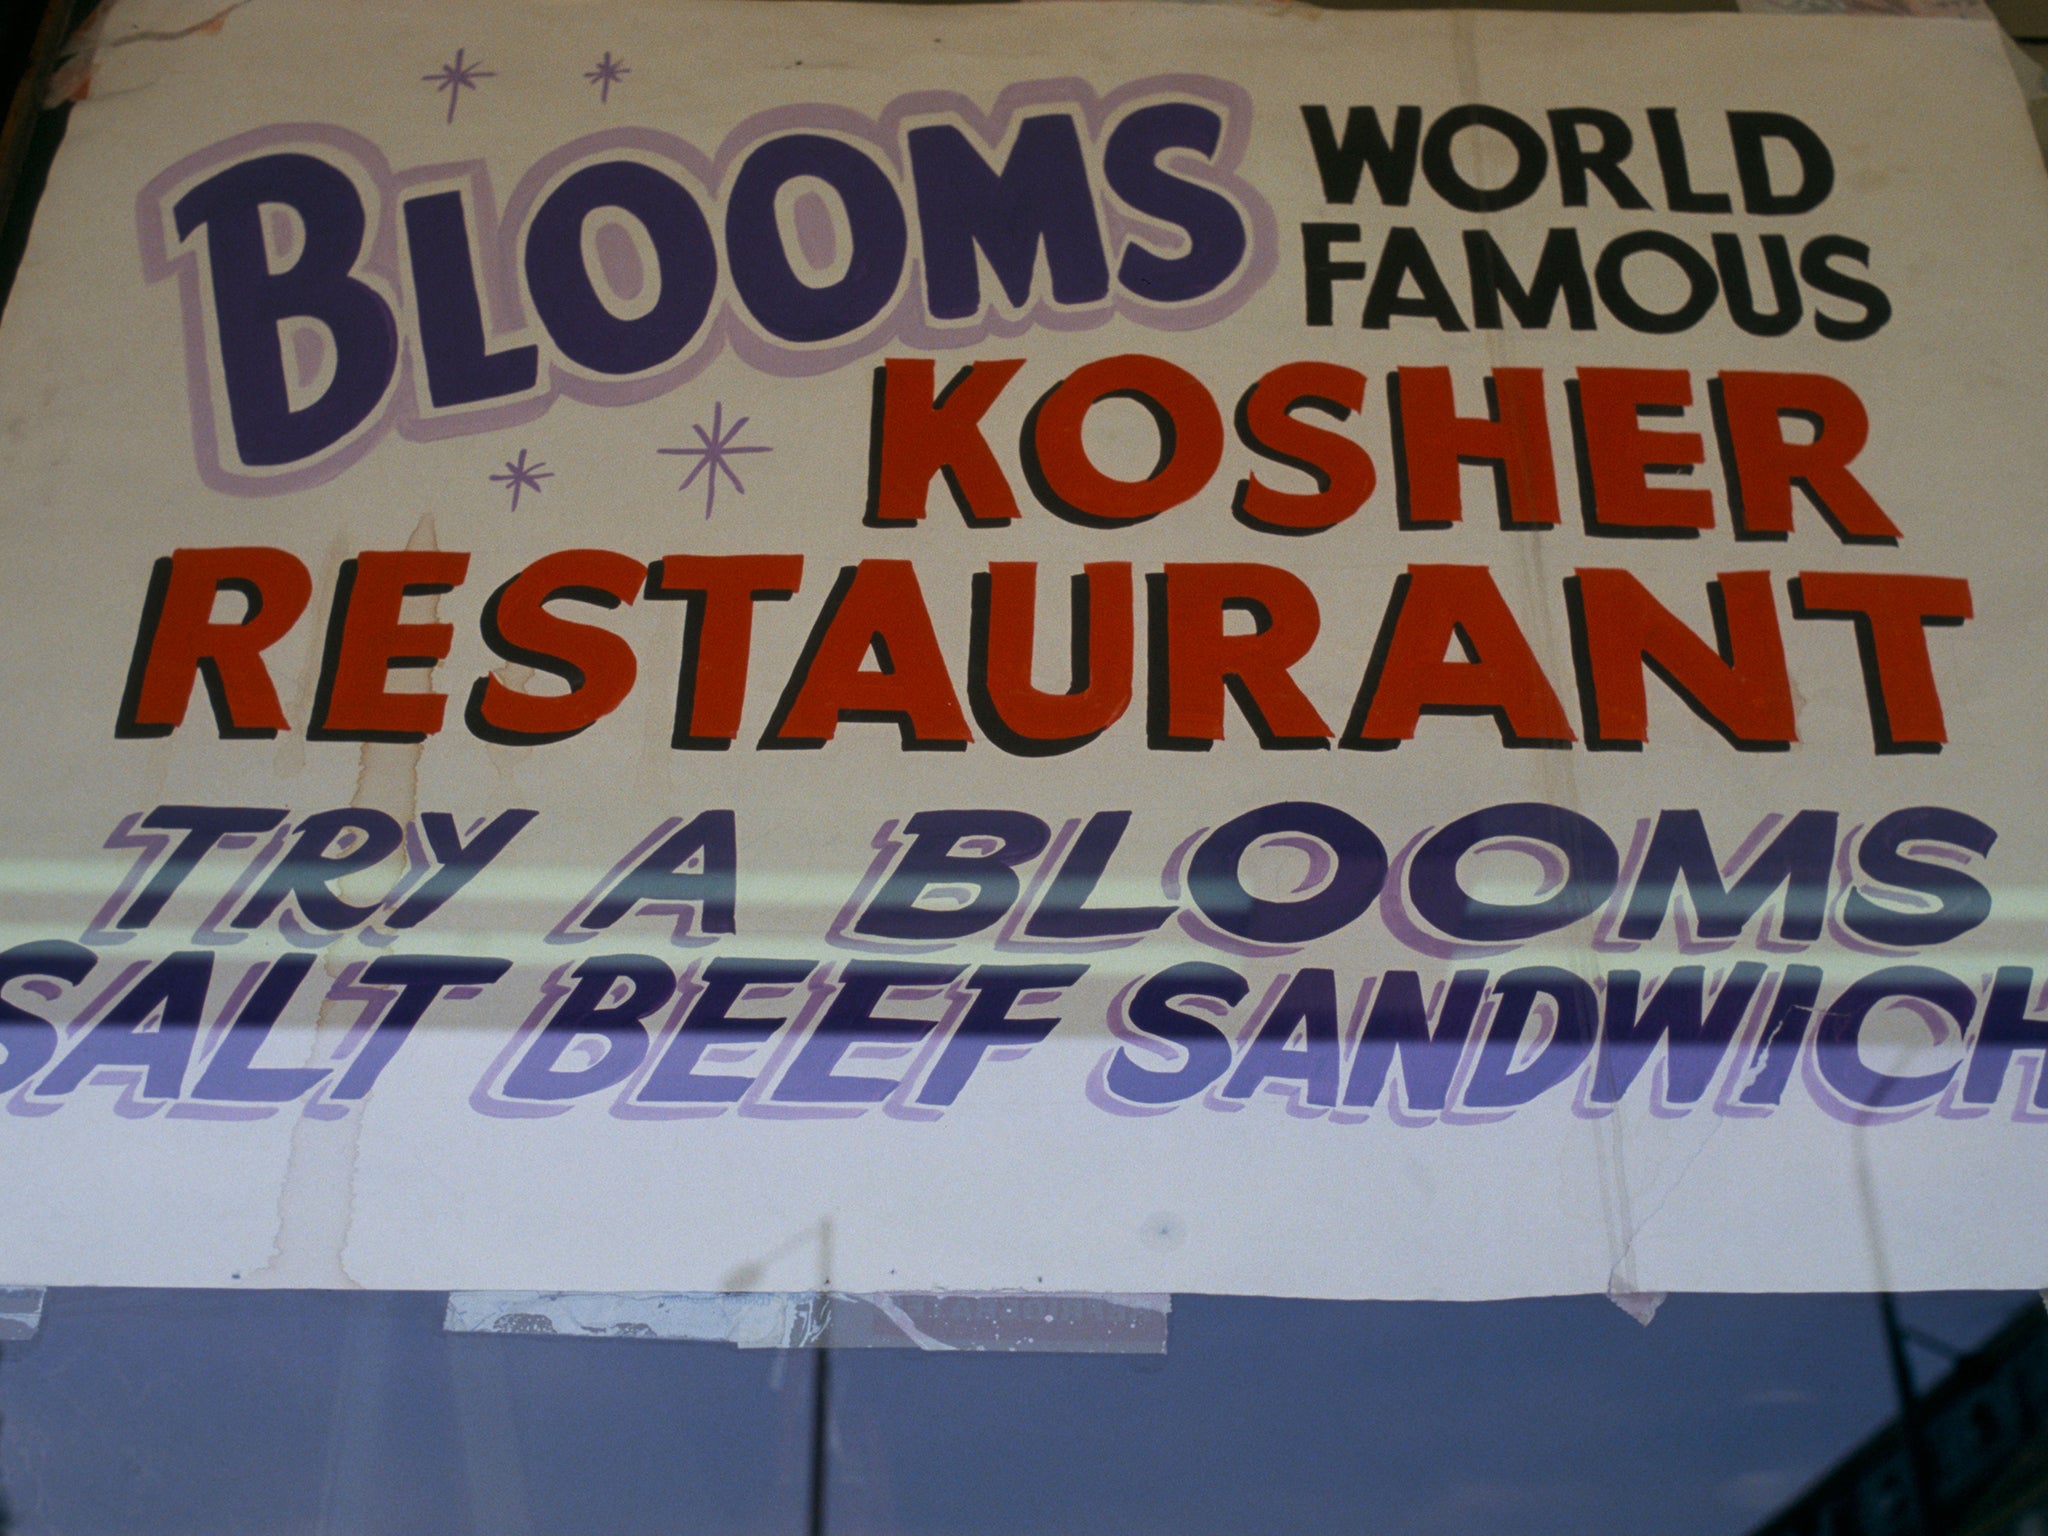 Bloom’s famous kosher restaurant in London, which closed in 2010